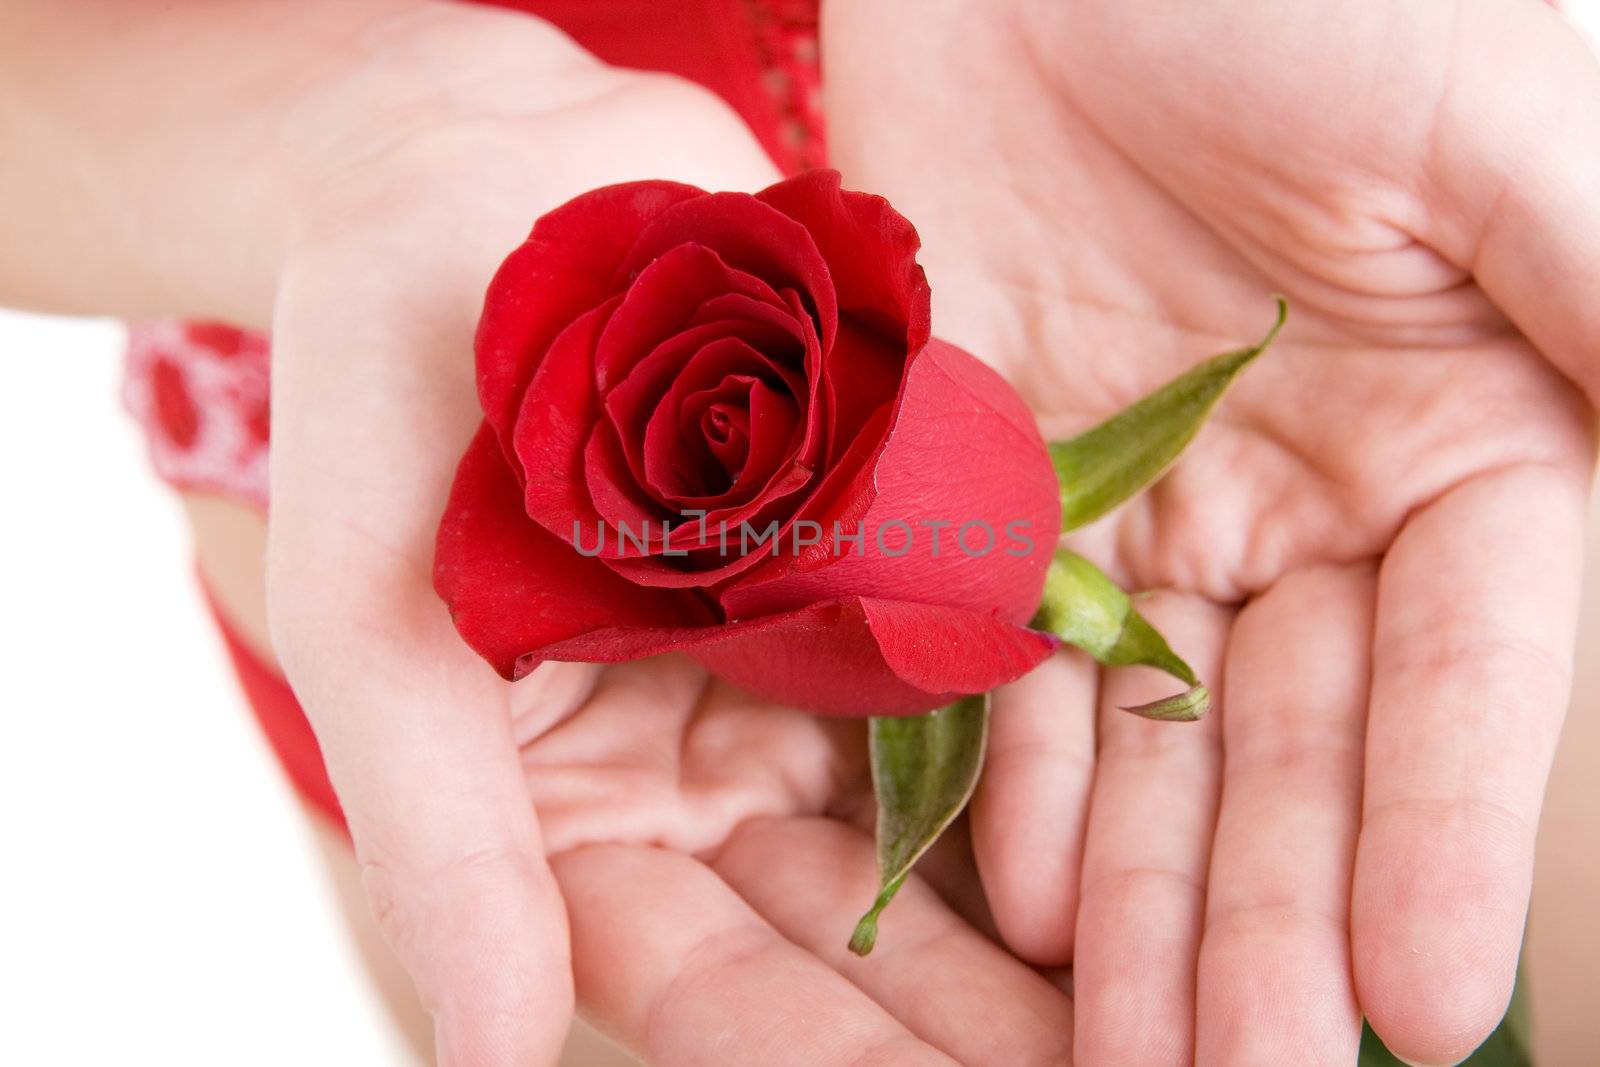 rose in hands of the girl